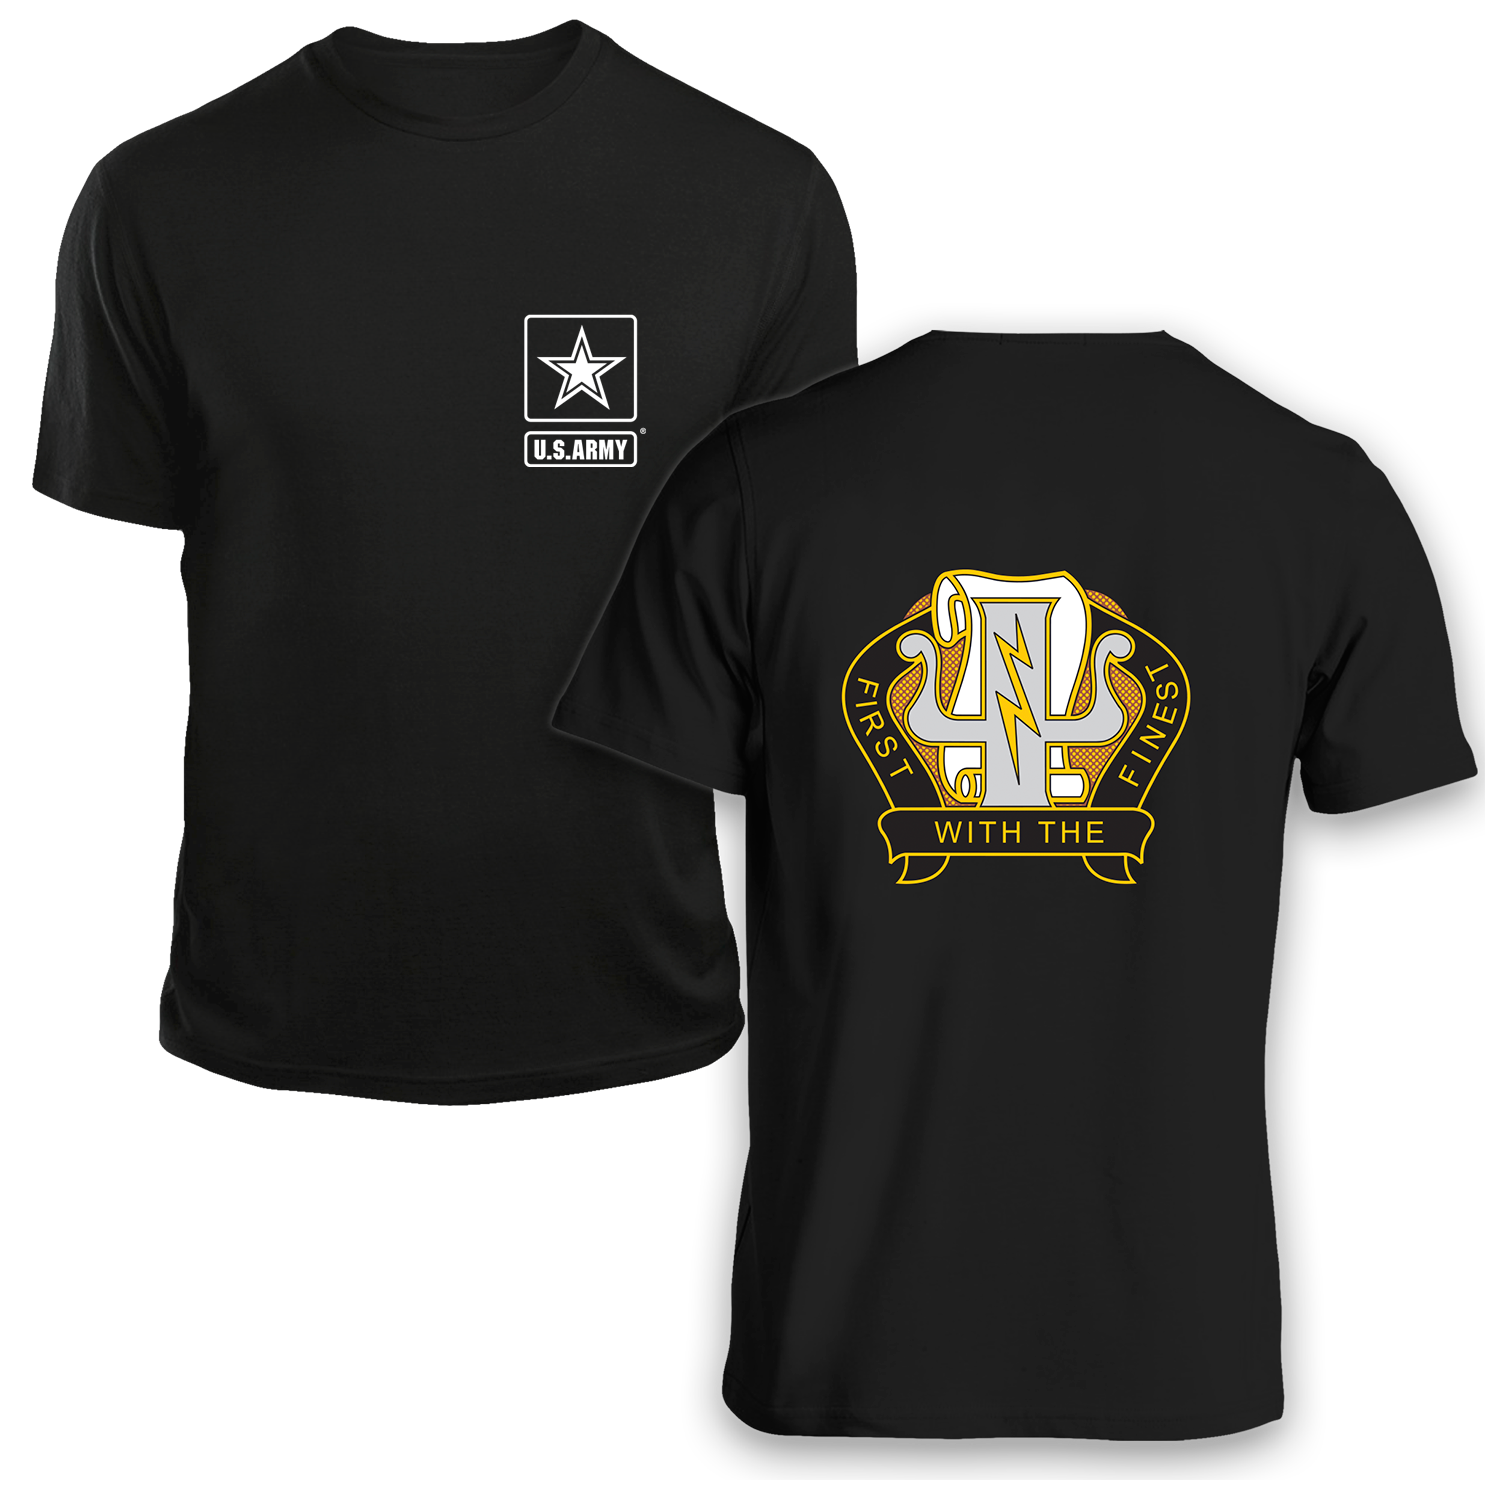 1st Psychological Operations Battalion Army Unit T-Shirt- MADE IS THE USA